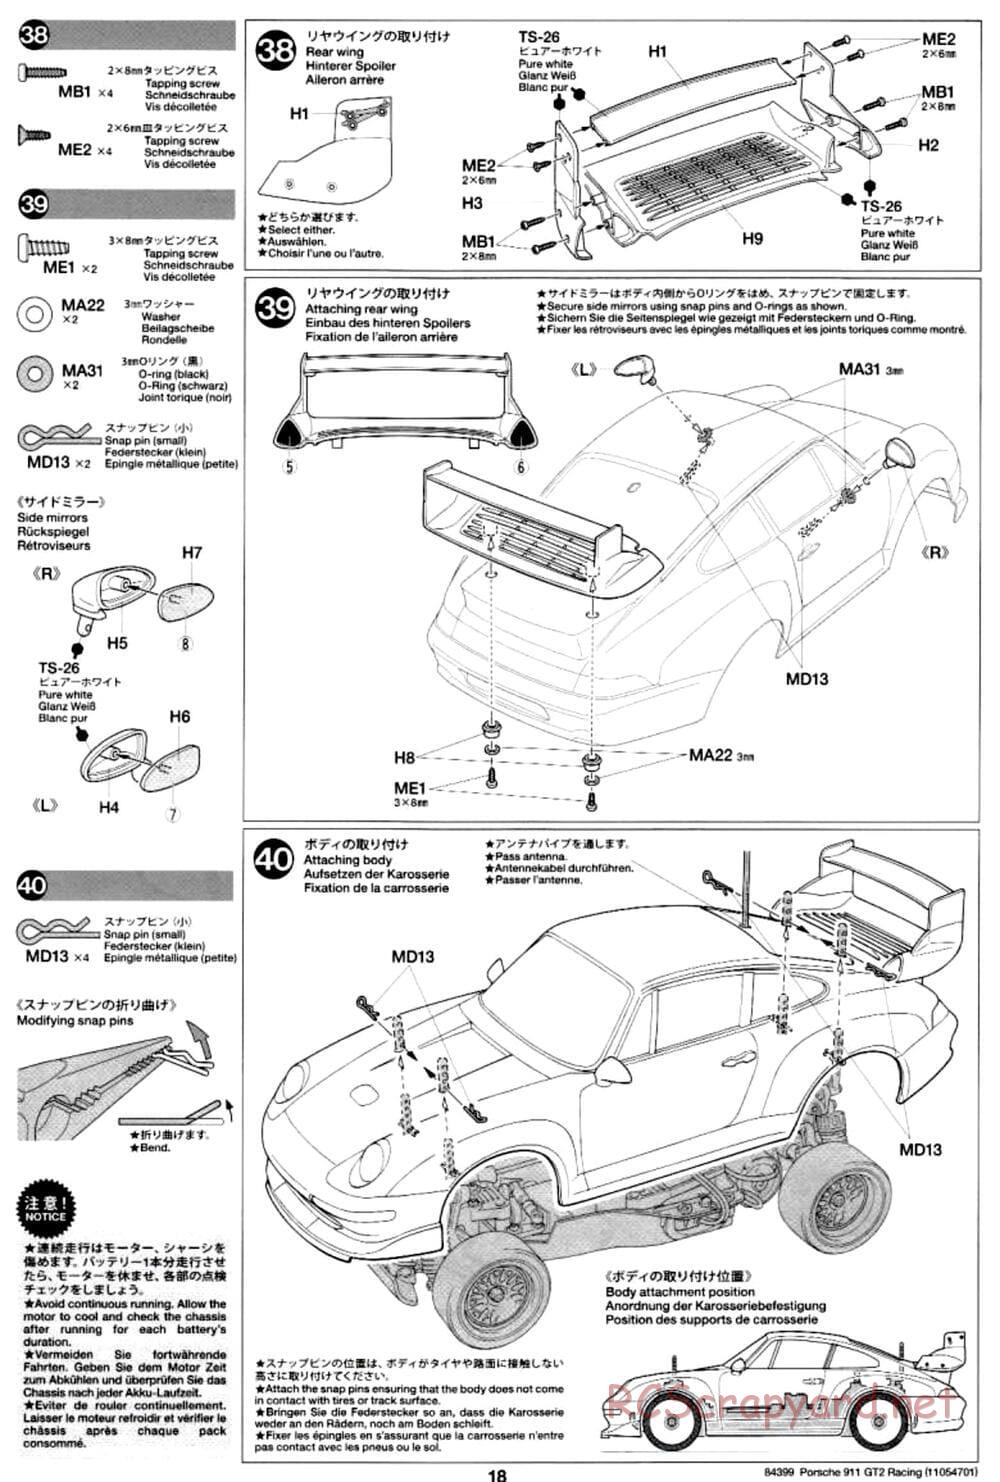 Tamiya - Porsche 911 GT2 Racing - TA02SW Chassis - Manual - Page 18